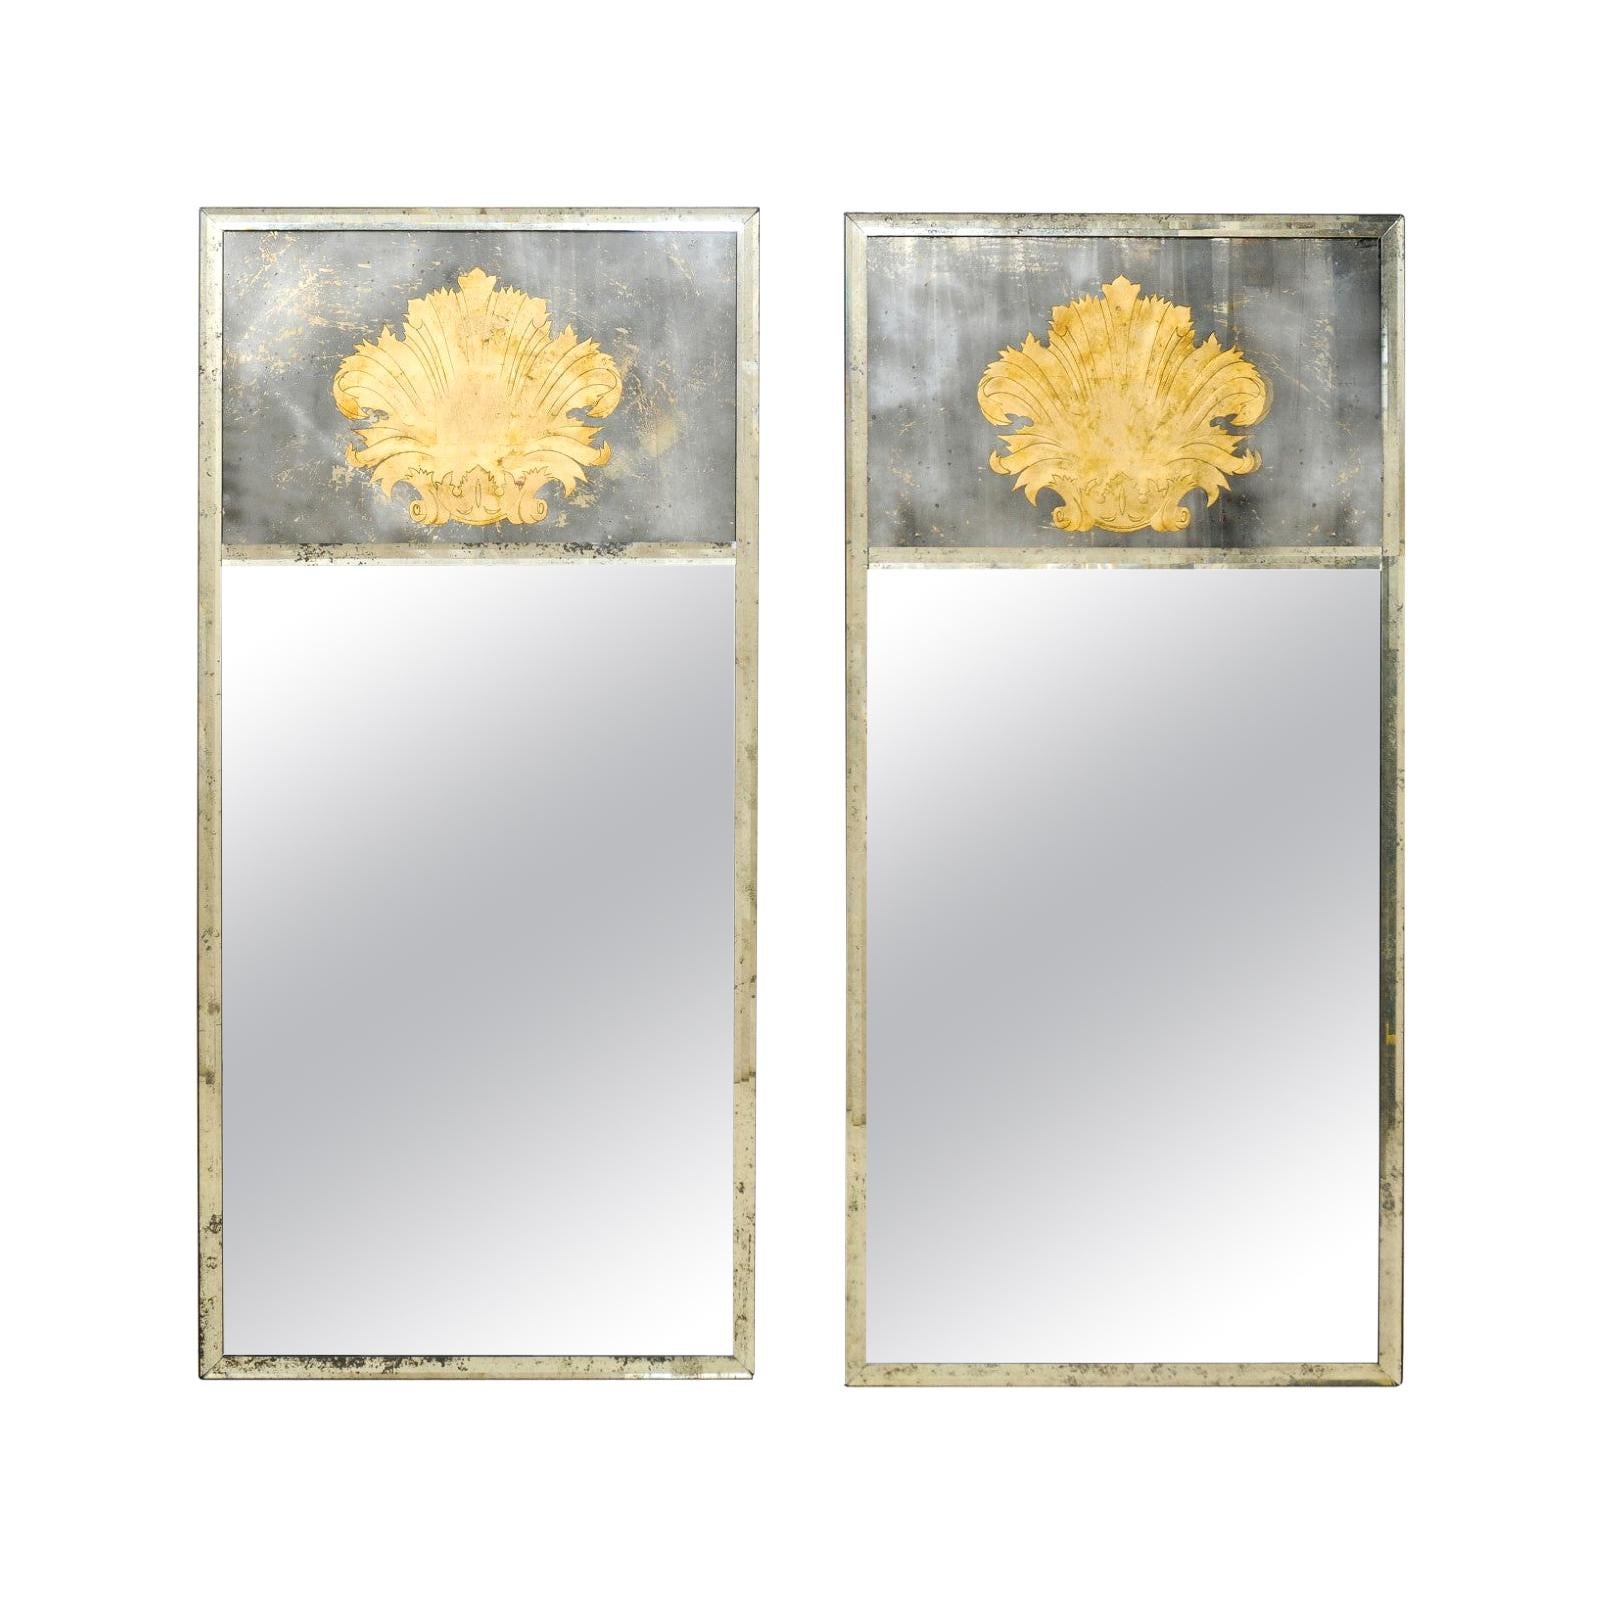 Pair of 6.5 Ft. Tall Artisan Mirrors Adorned with Verre Églomisé Acanthus Leaves